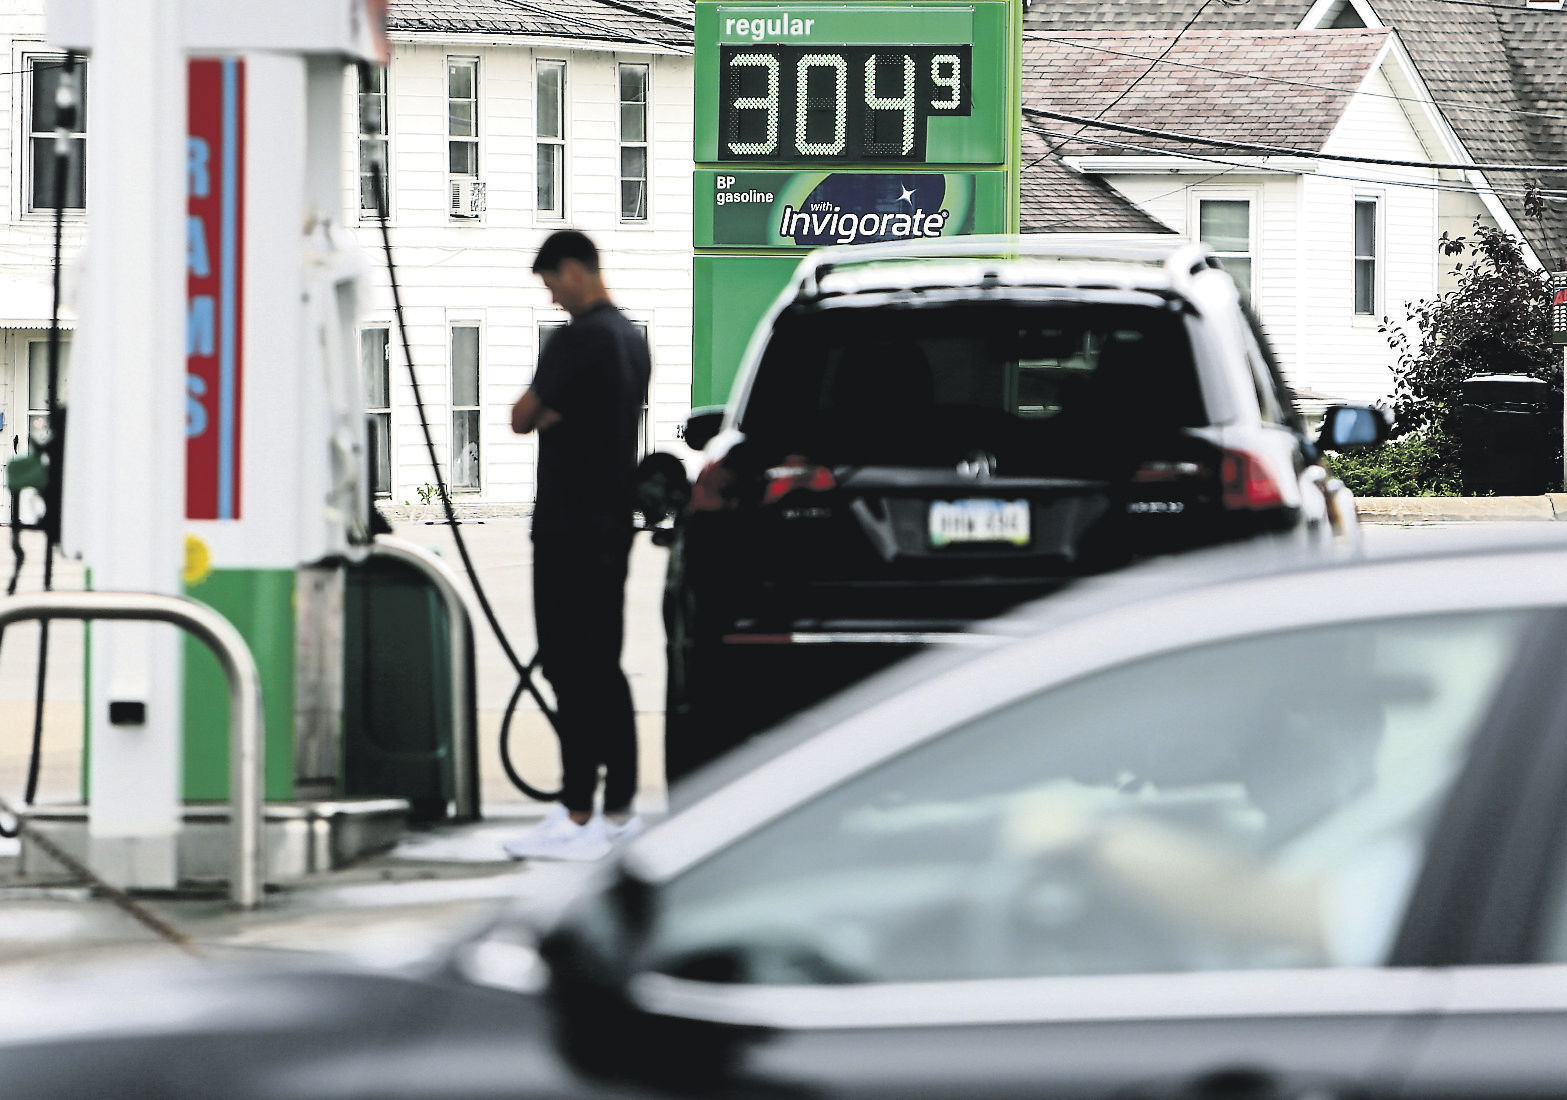 A person puts gas into their vehicle at Kwik Stop at the corner of University Avenue and Asbury Road in June. High gas prices hit the area for much of 2021 and inflation could continue at relatively high rates this year.    PHOTO CREDIT: Dave Kettering